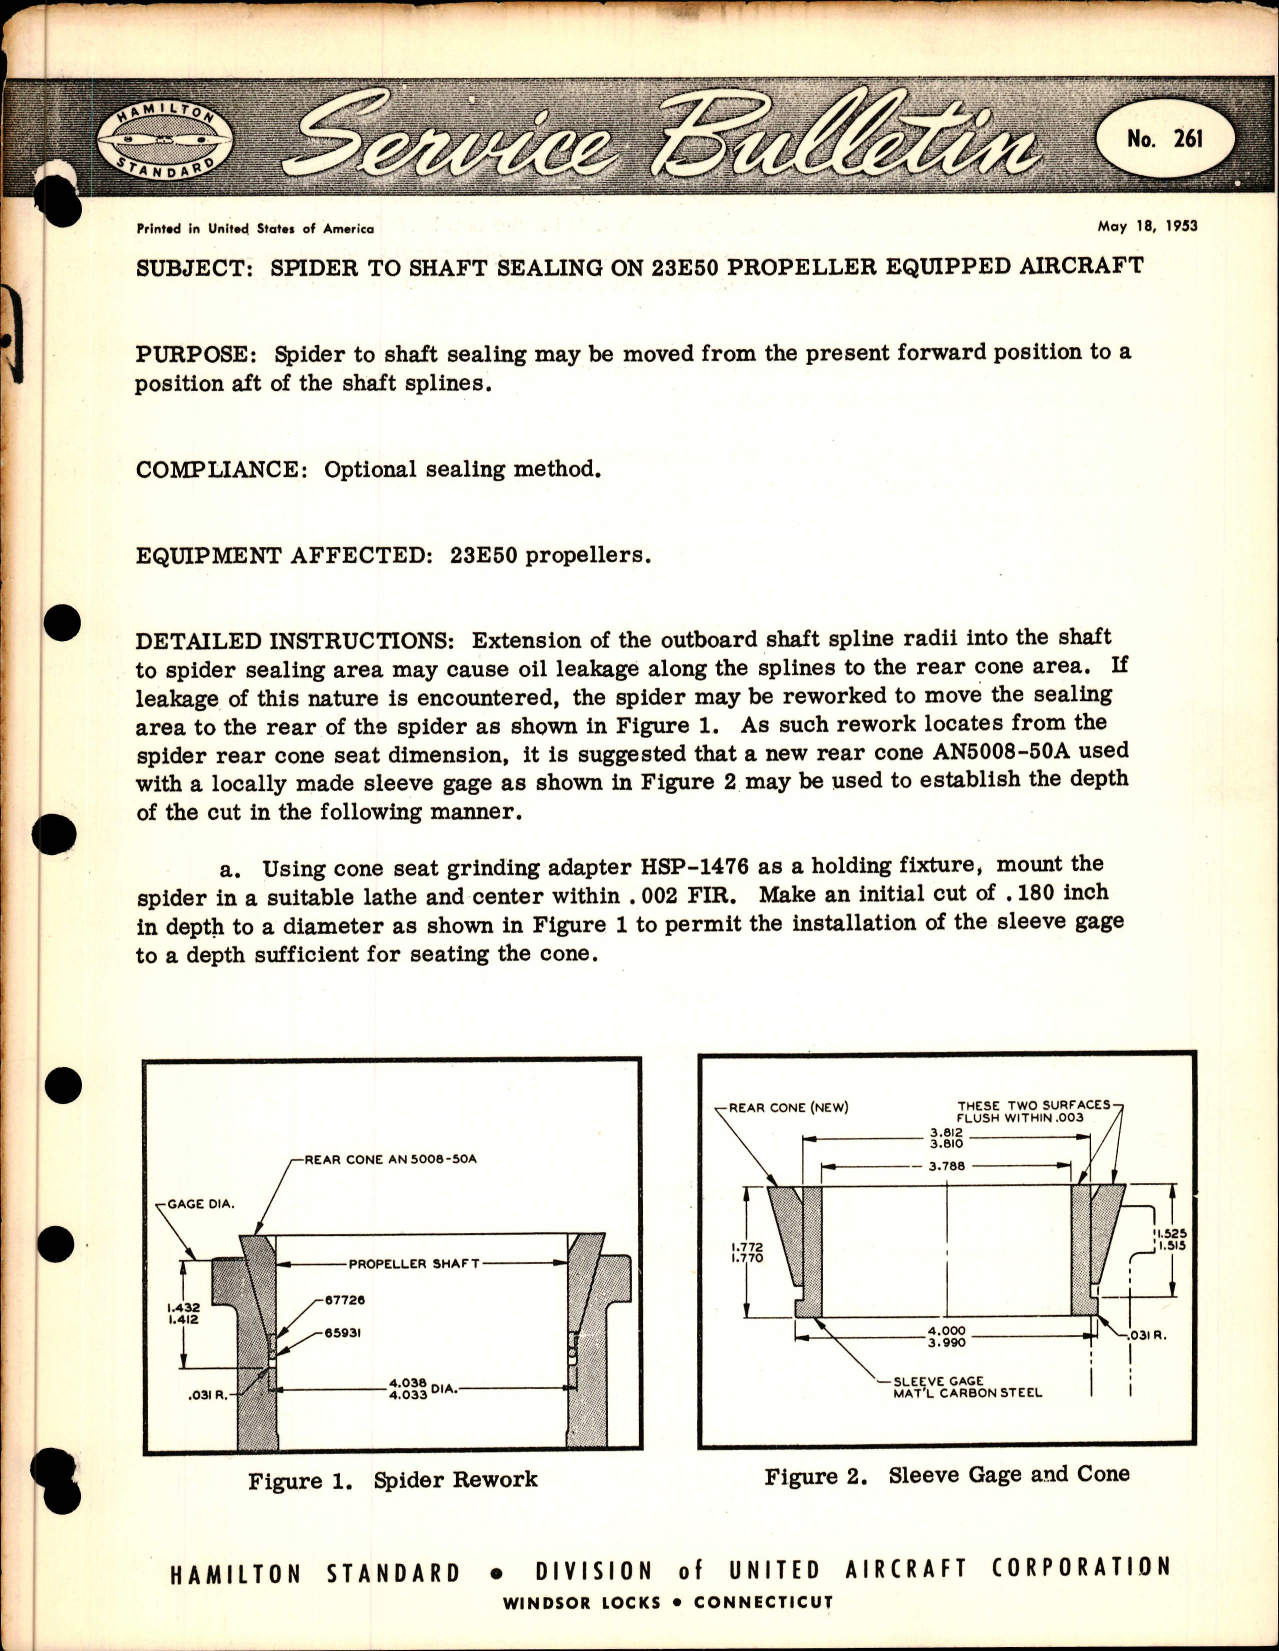 Sample page 1 from AirCorps Library document: Spider to Shaft Sealing on 23E50 Propeller Equipped Aircraft